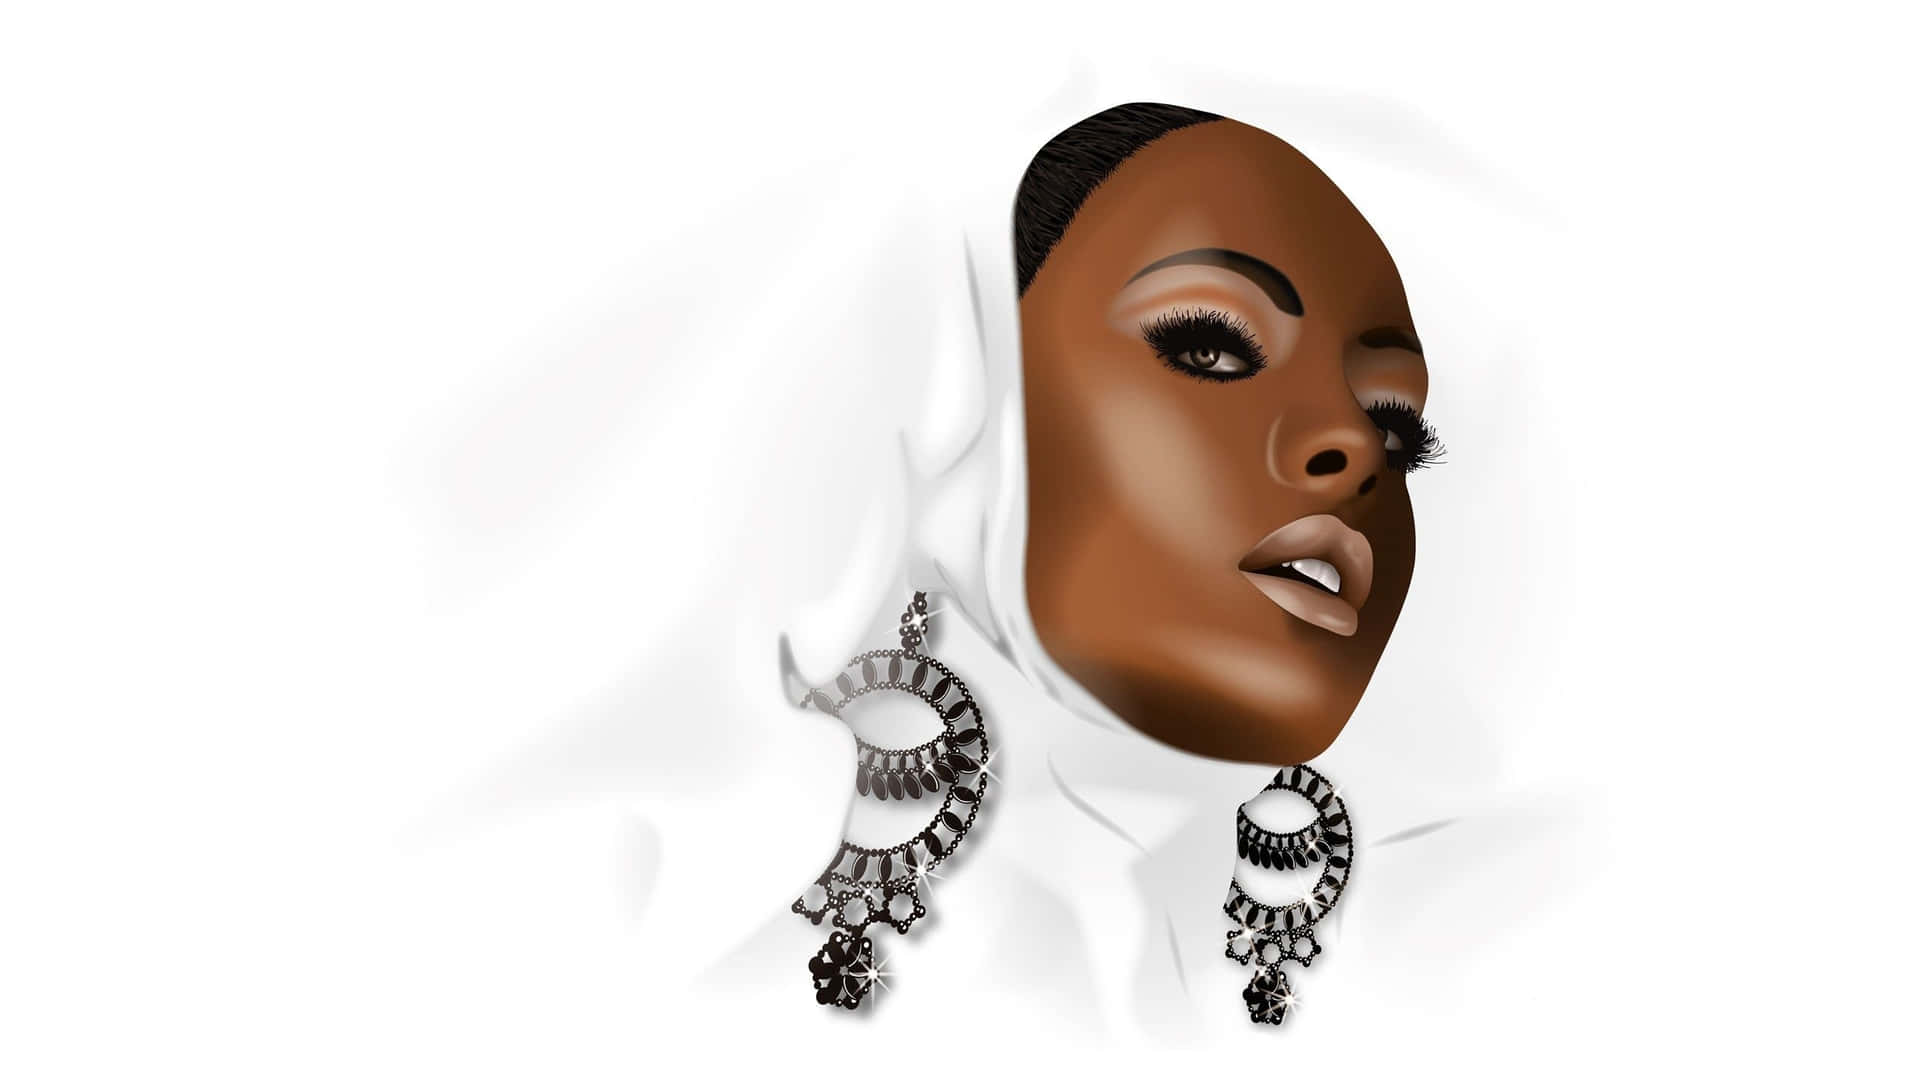 A Black Woman With Earrings And A White Head Scarf Wallpaper